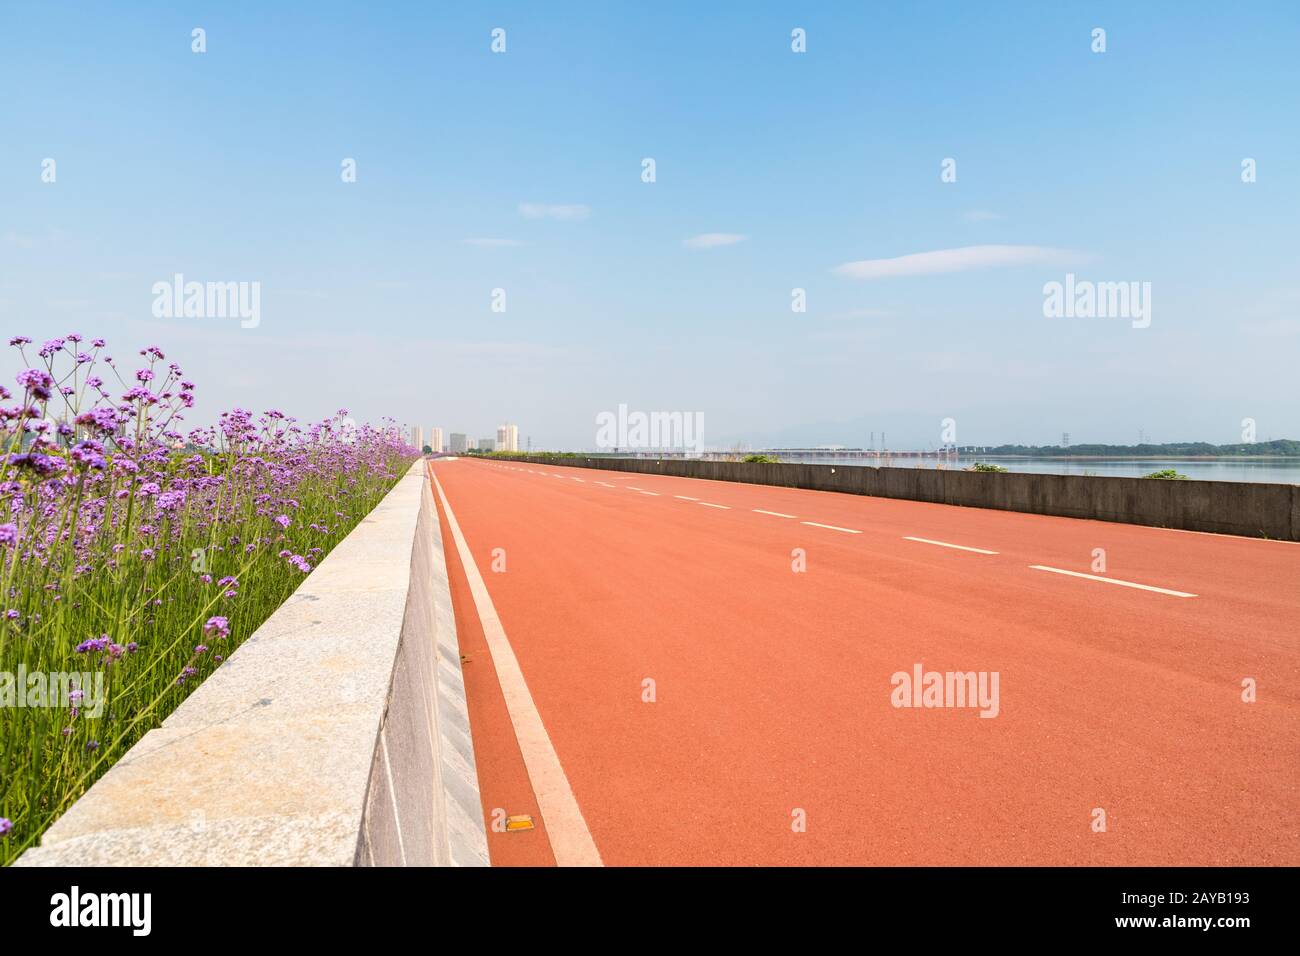 fitness trails on lakeside Stock Photo